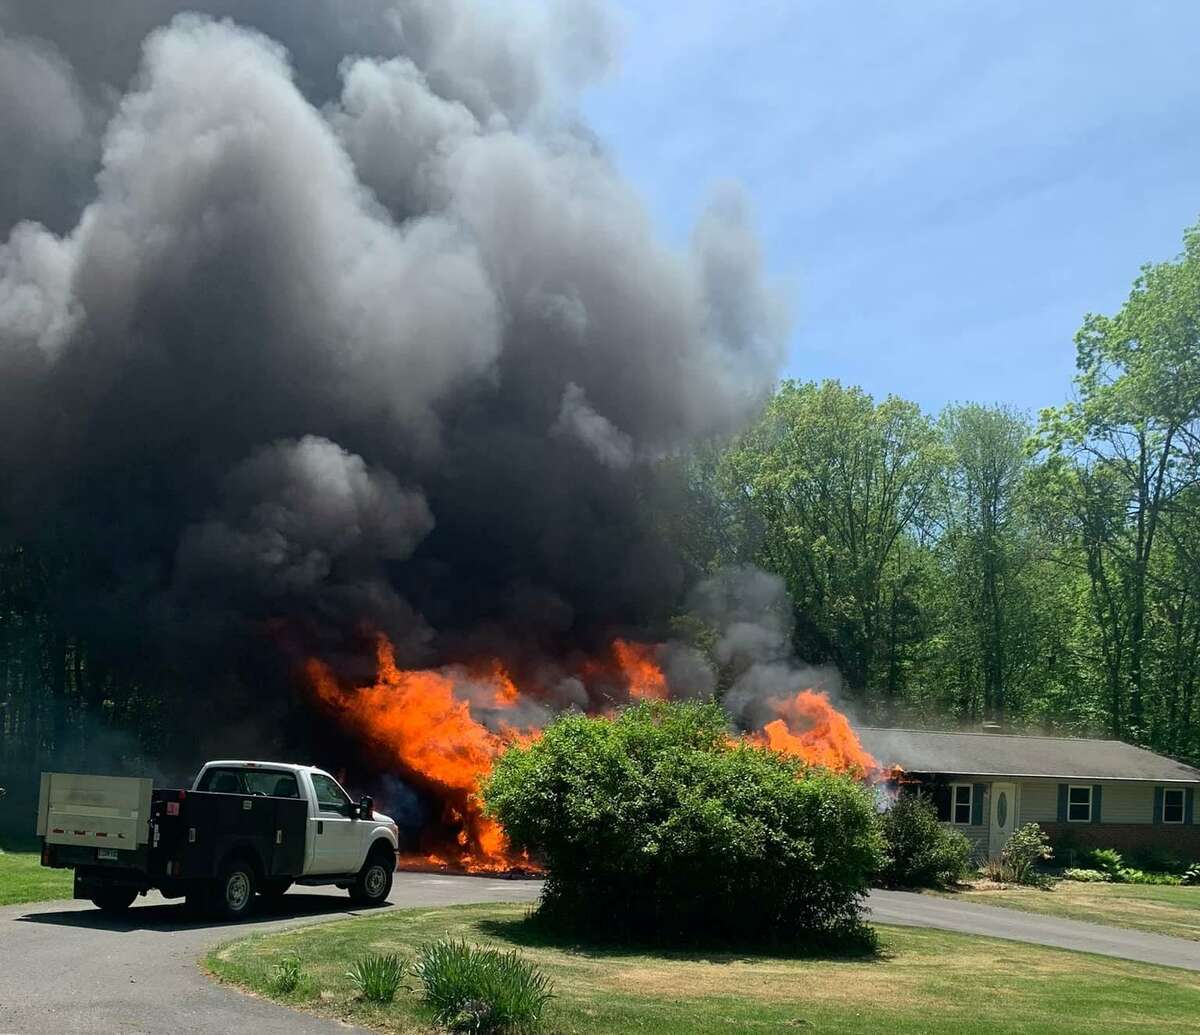 A person was sent to the hospital after a garage fire raged on a Killingly home Monday.